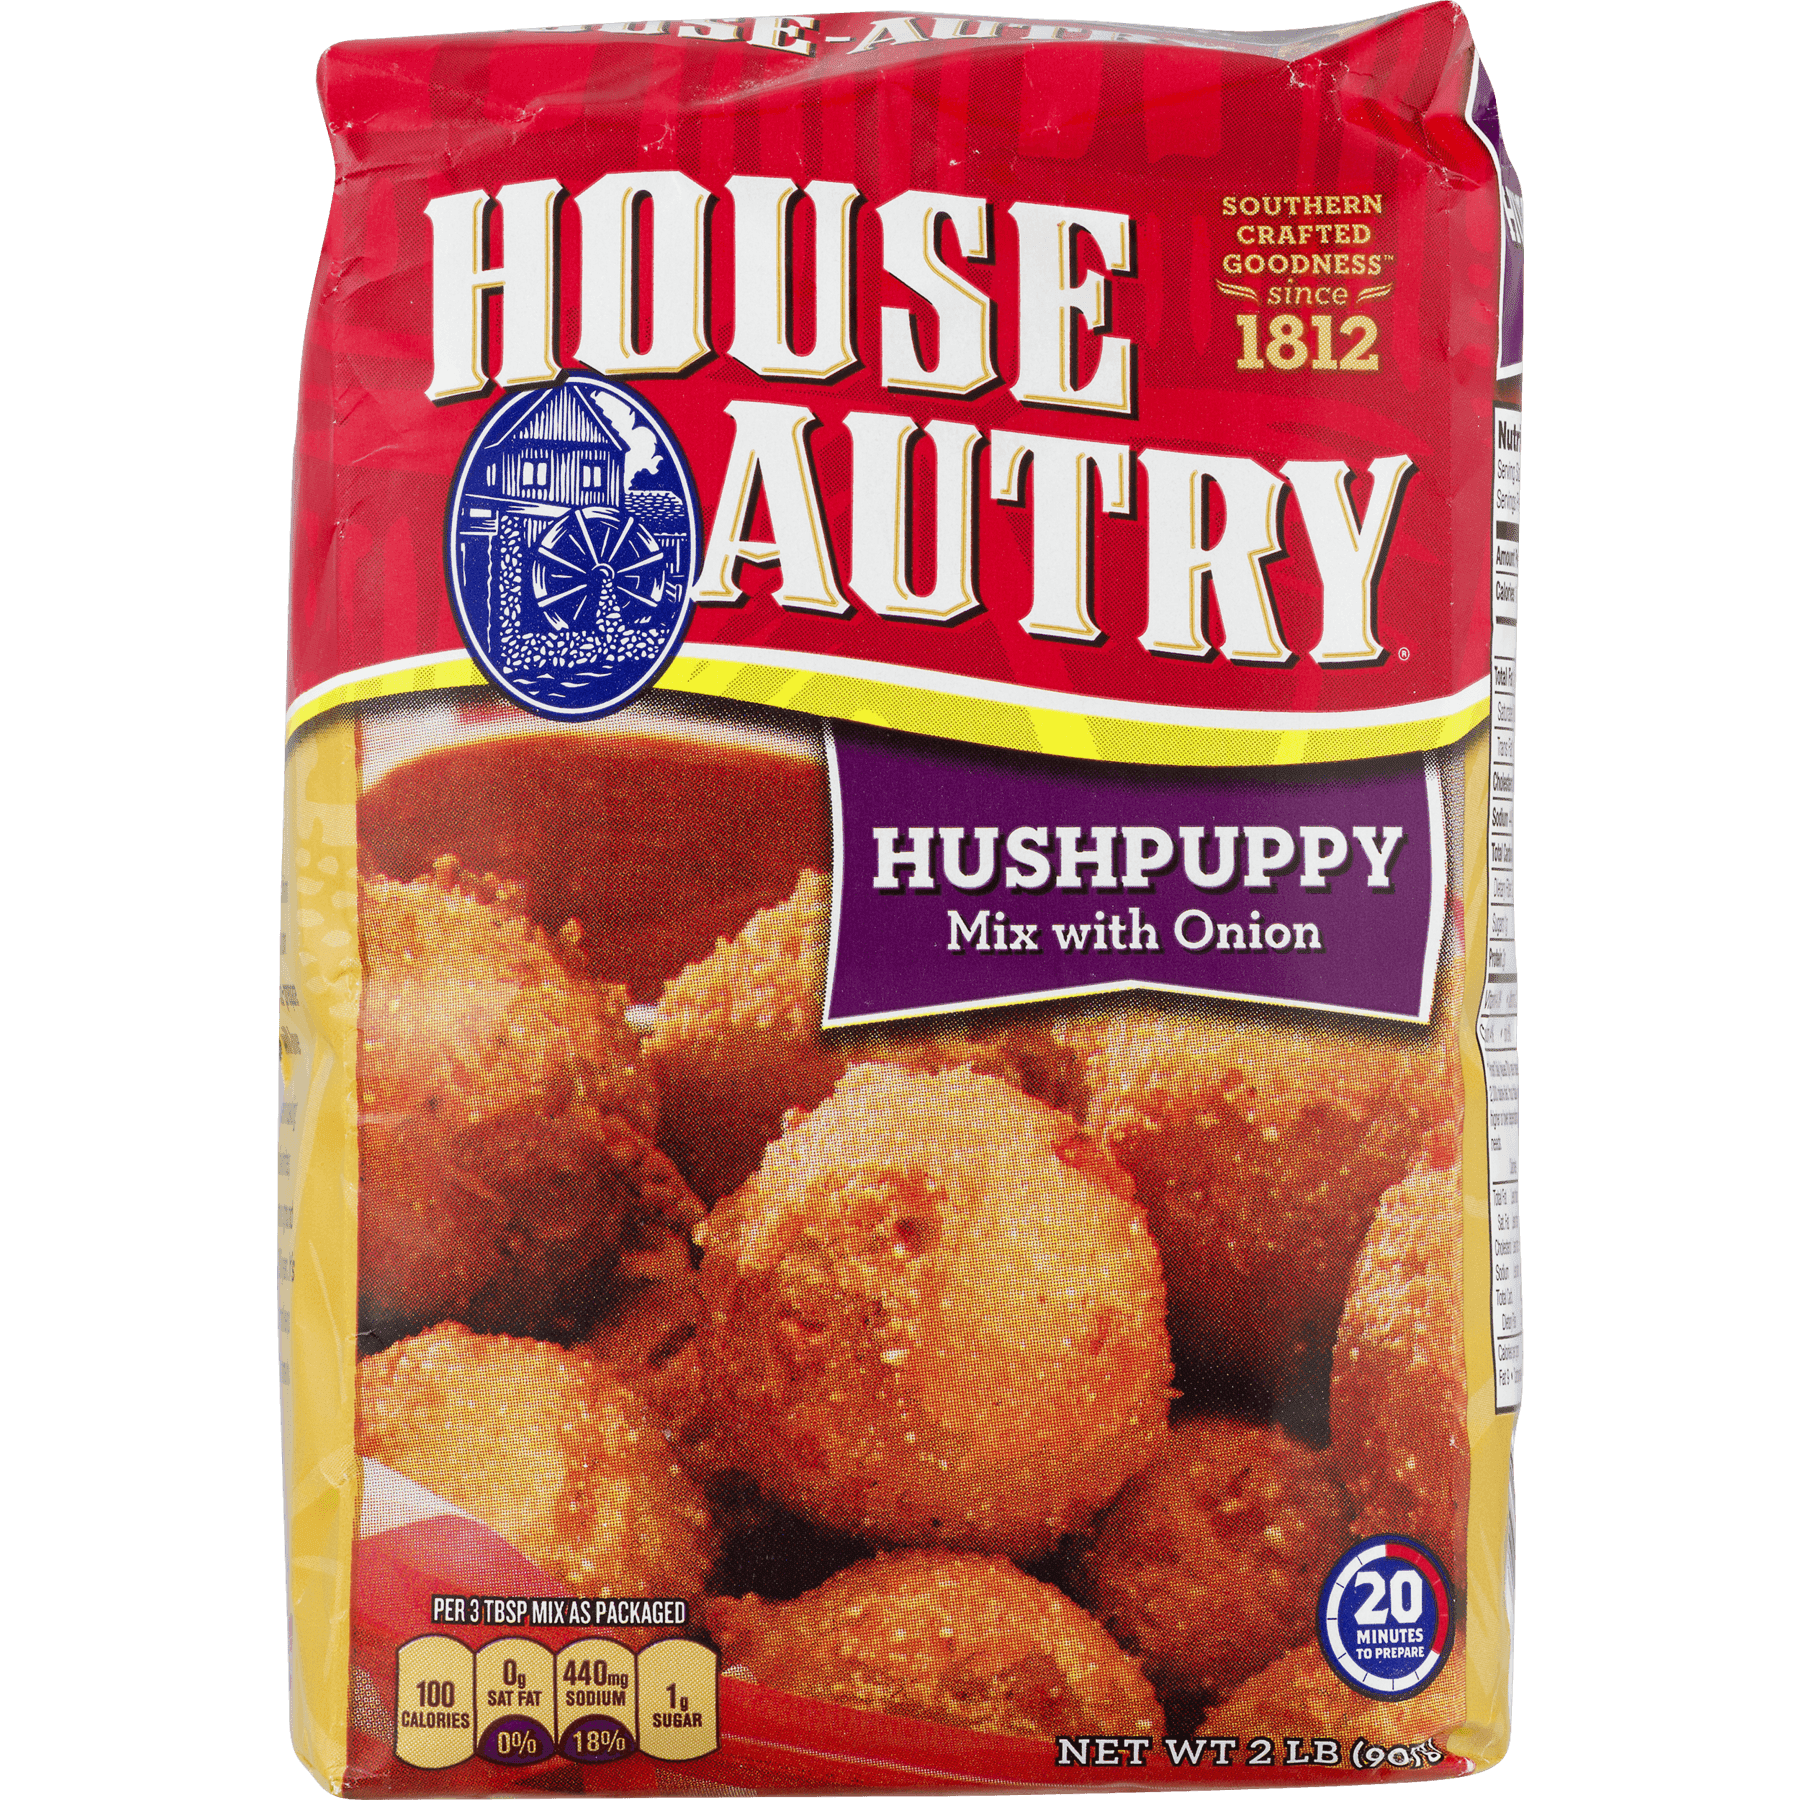 House-Autry Hushpuppy Mix with 2 lbs - Walmart.com